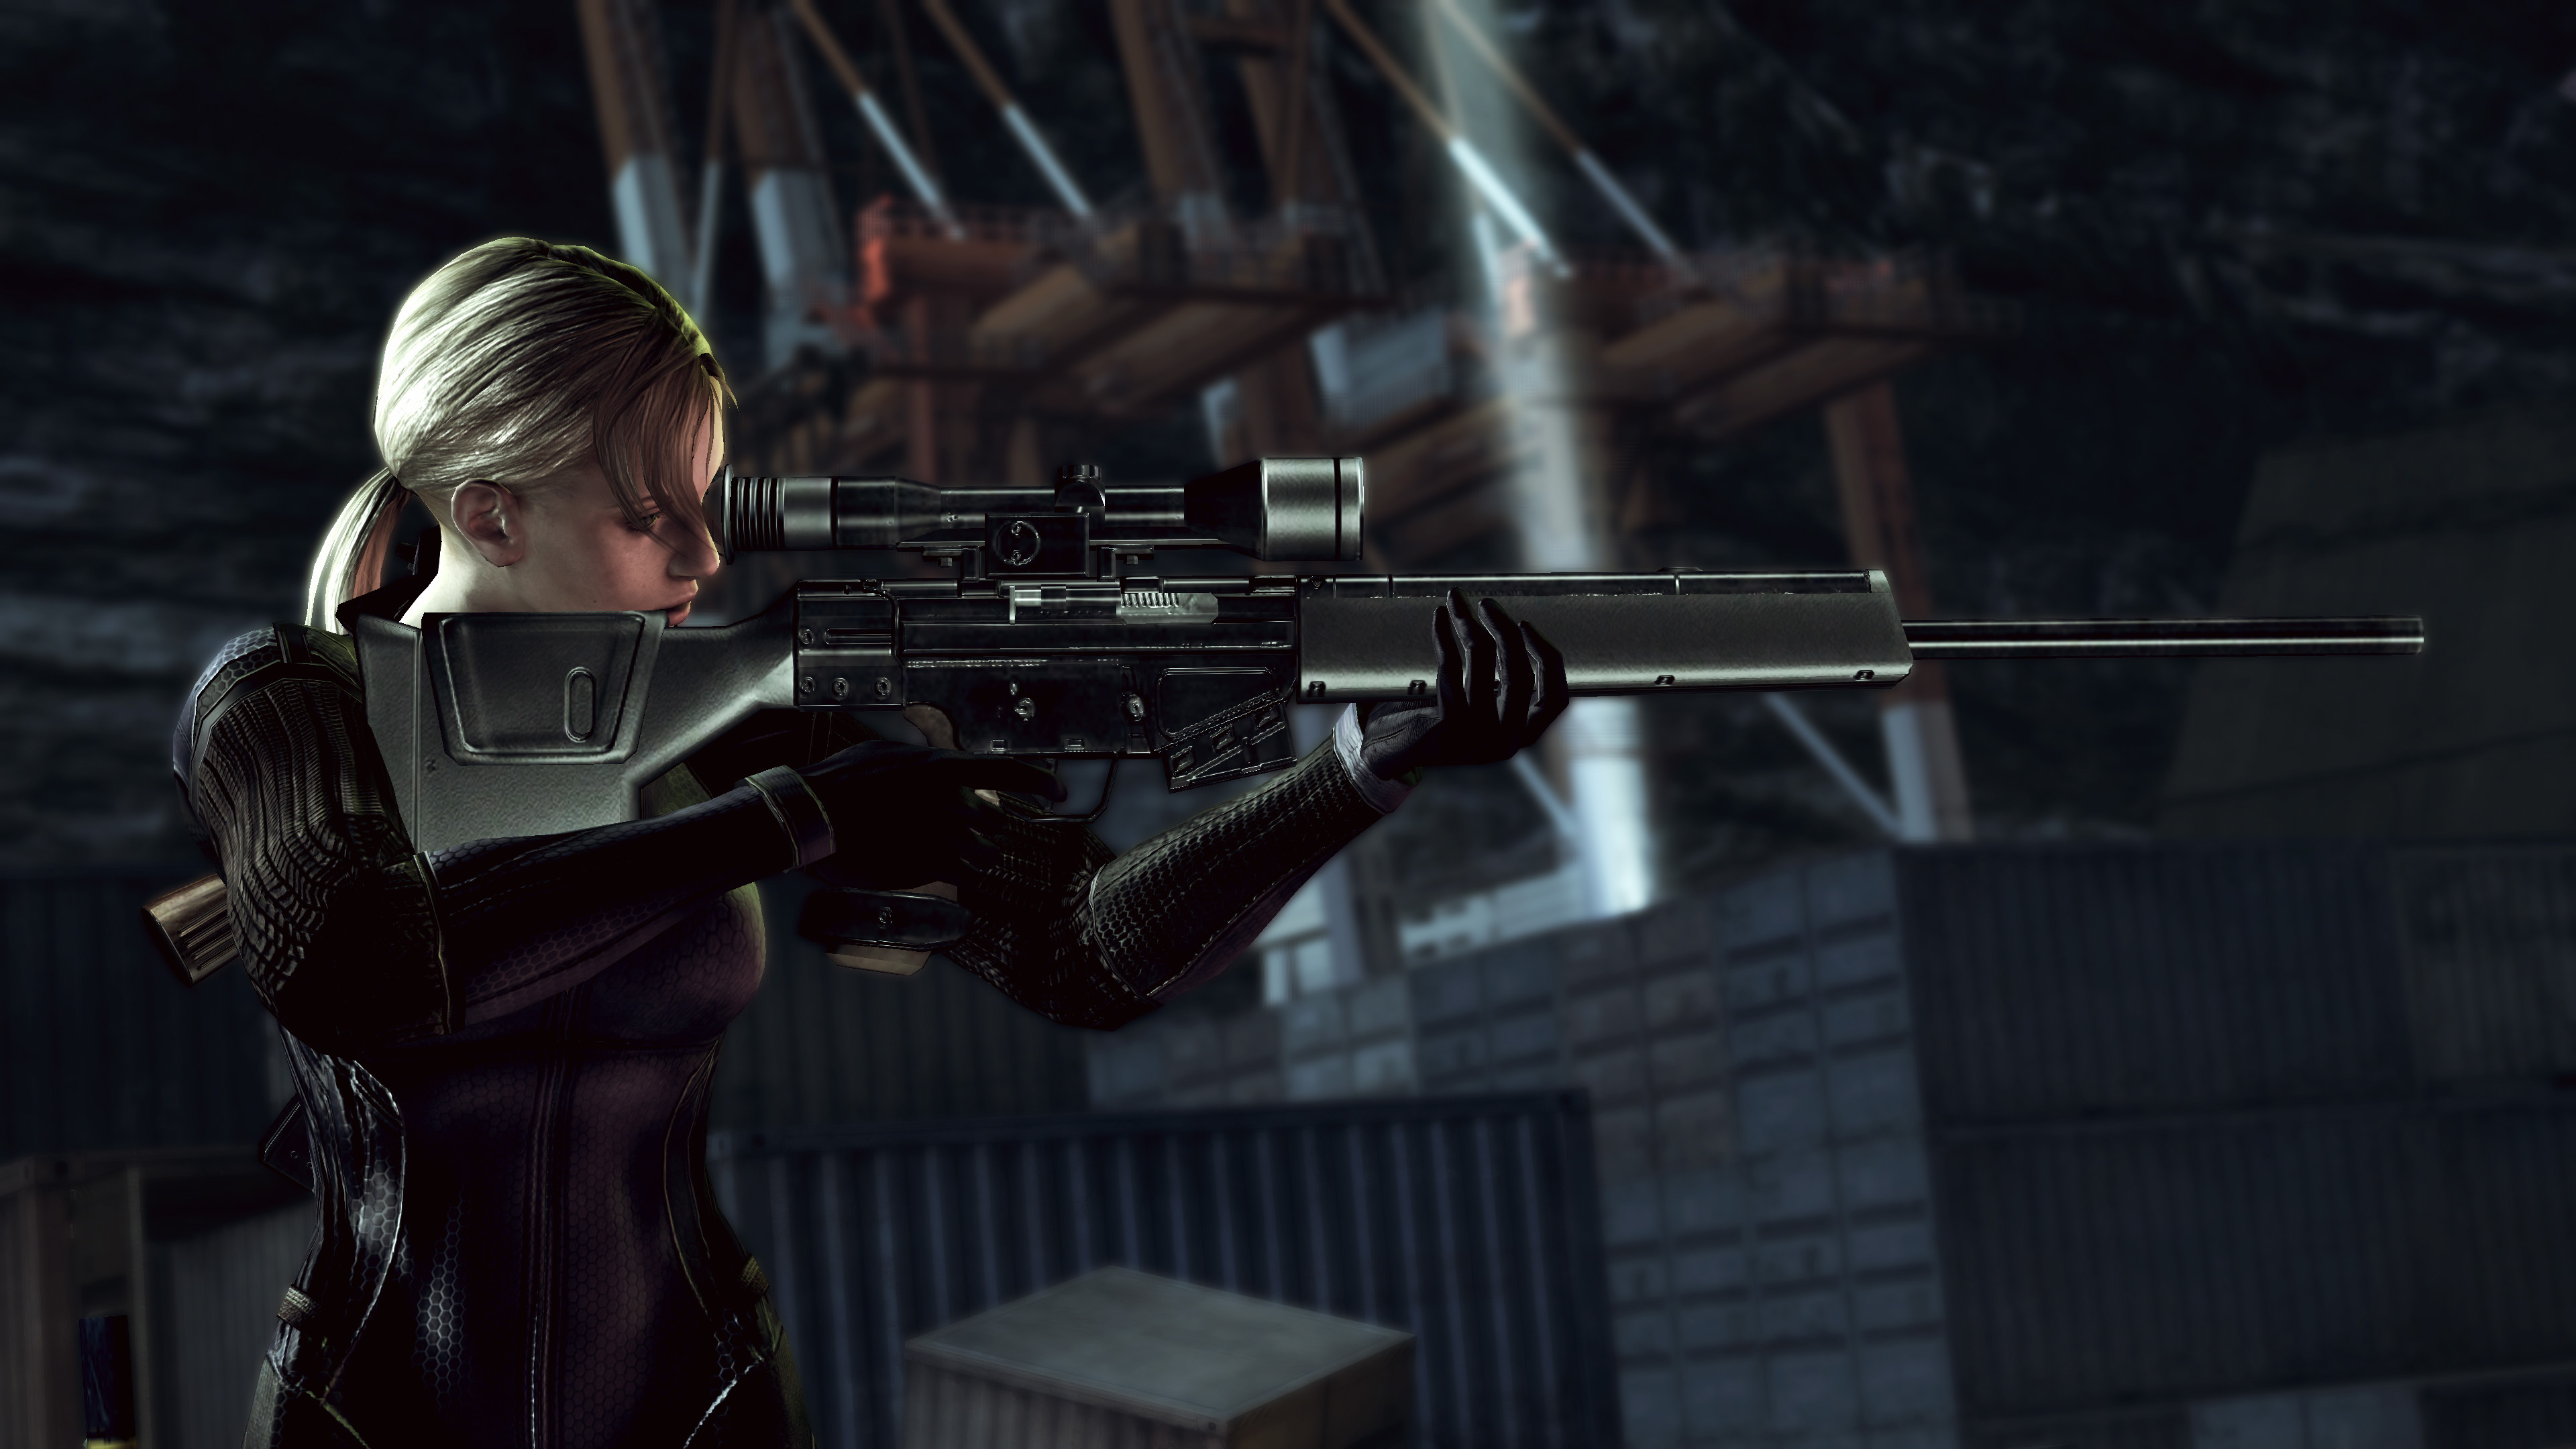 3840x2160 13 4K Ultra HD Resident Evil Wallpapers | Backgrounds - Wallpaper Abyss